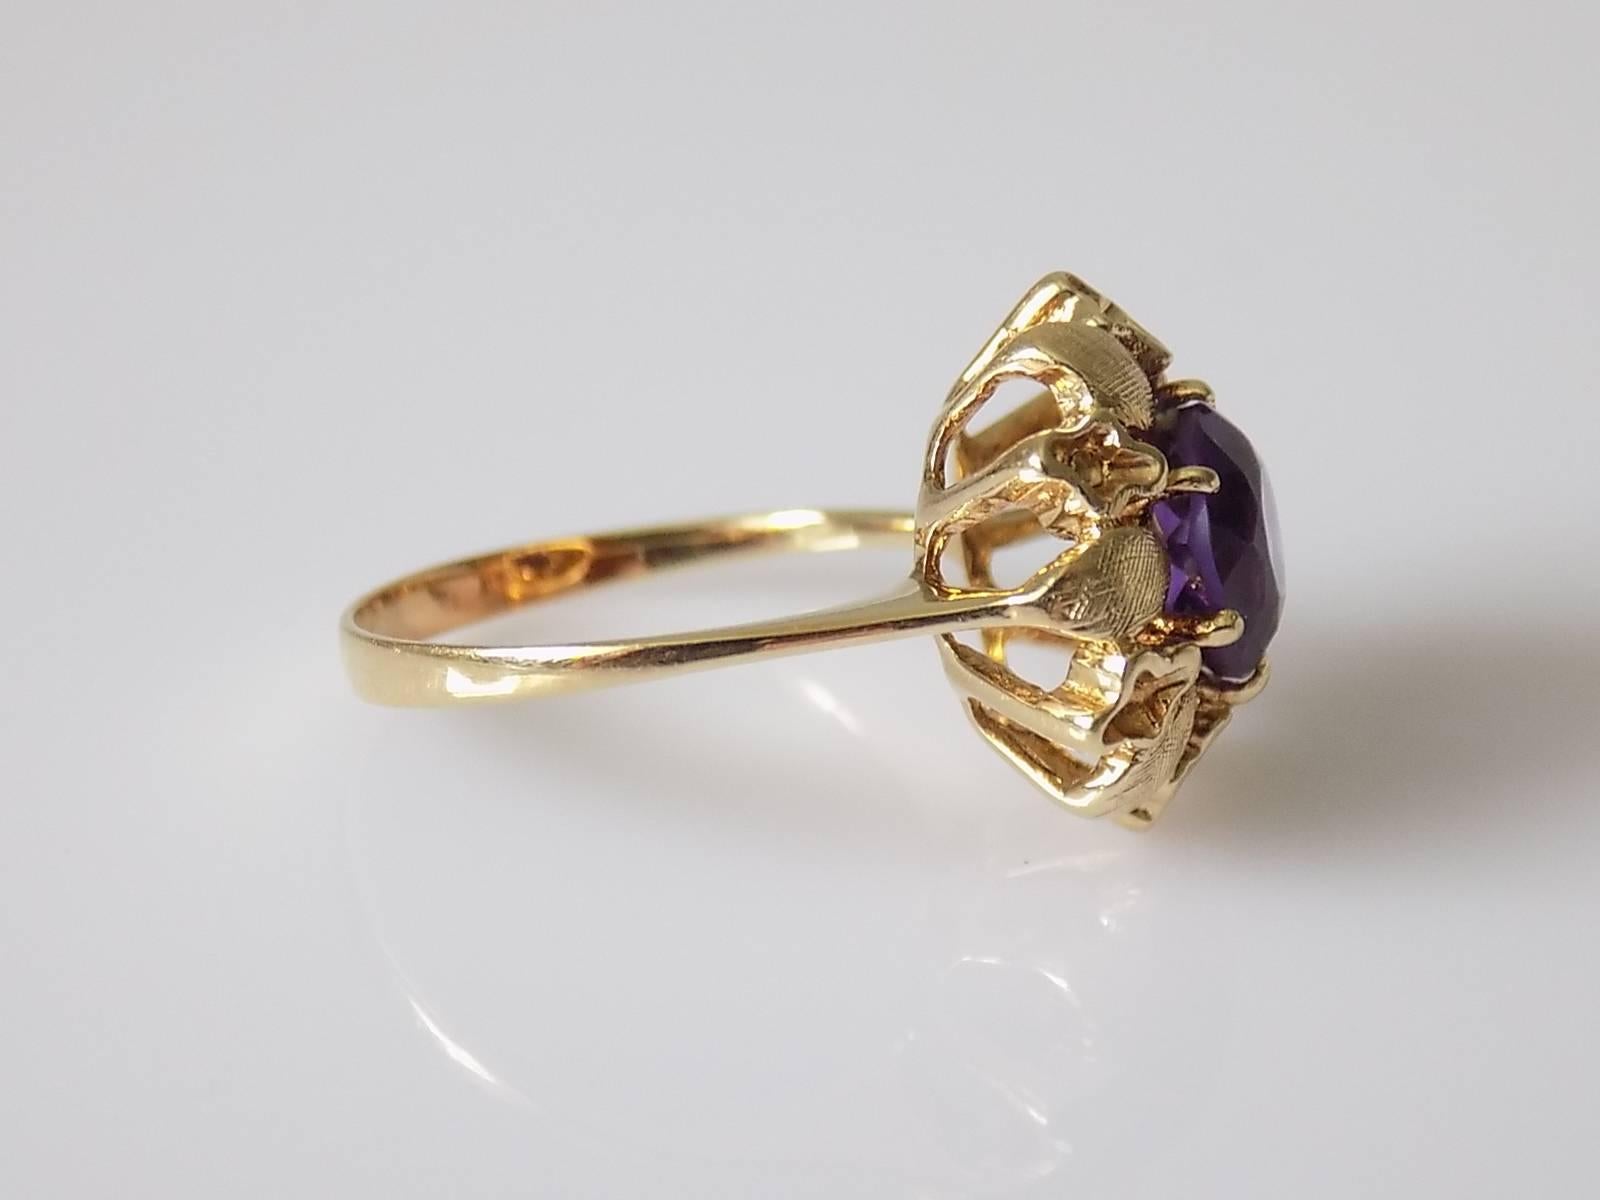 A lovely Vintage c.1950s 14 Carat Gold and Amethyst flower designed solitaire ring.
Size L 1/2 UK, 6.25 US
Height of the face 15mm.
Amethyst 7mm.
Weight 3.4gr.
Unmarked, tested 14 Carat Gold.